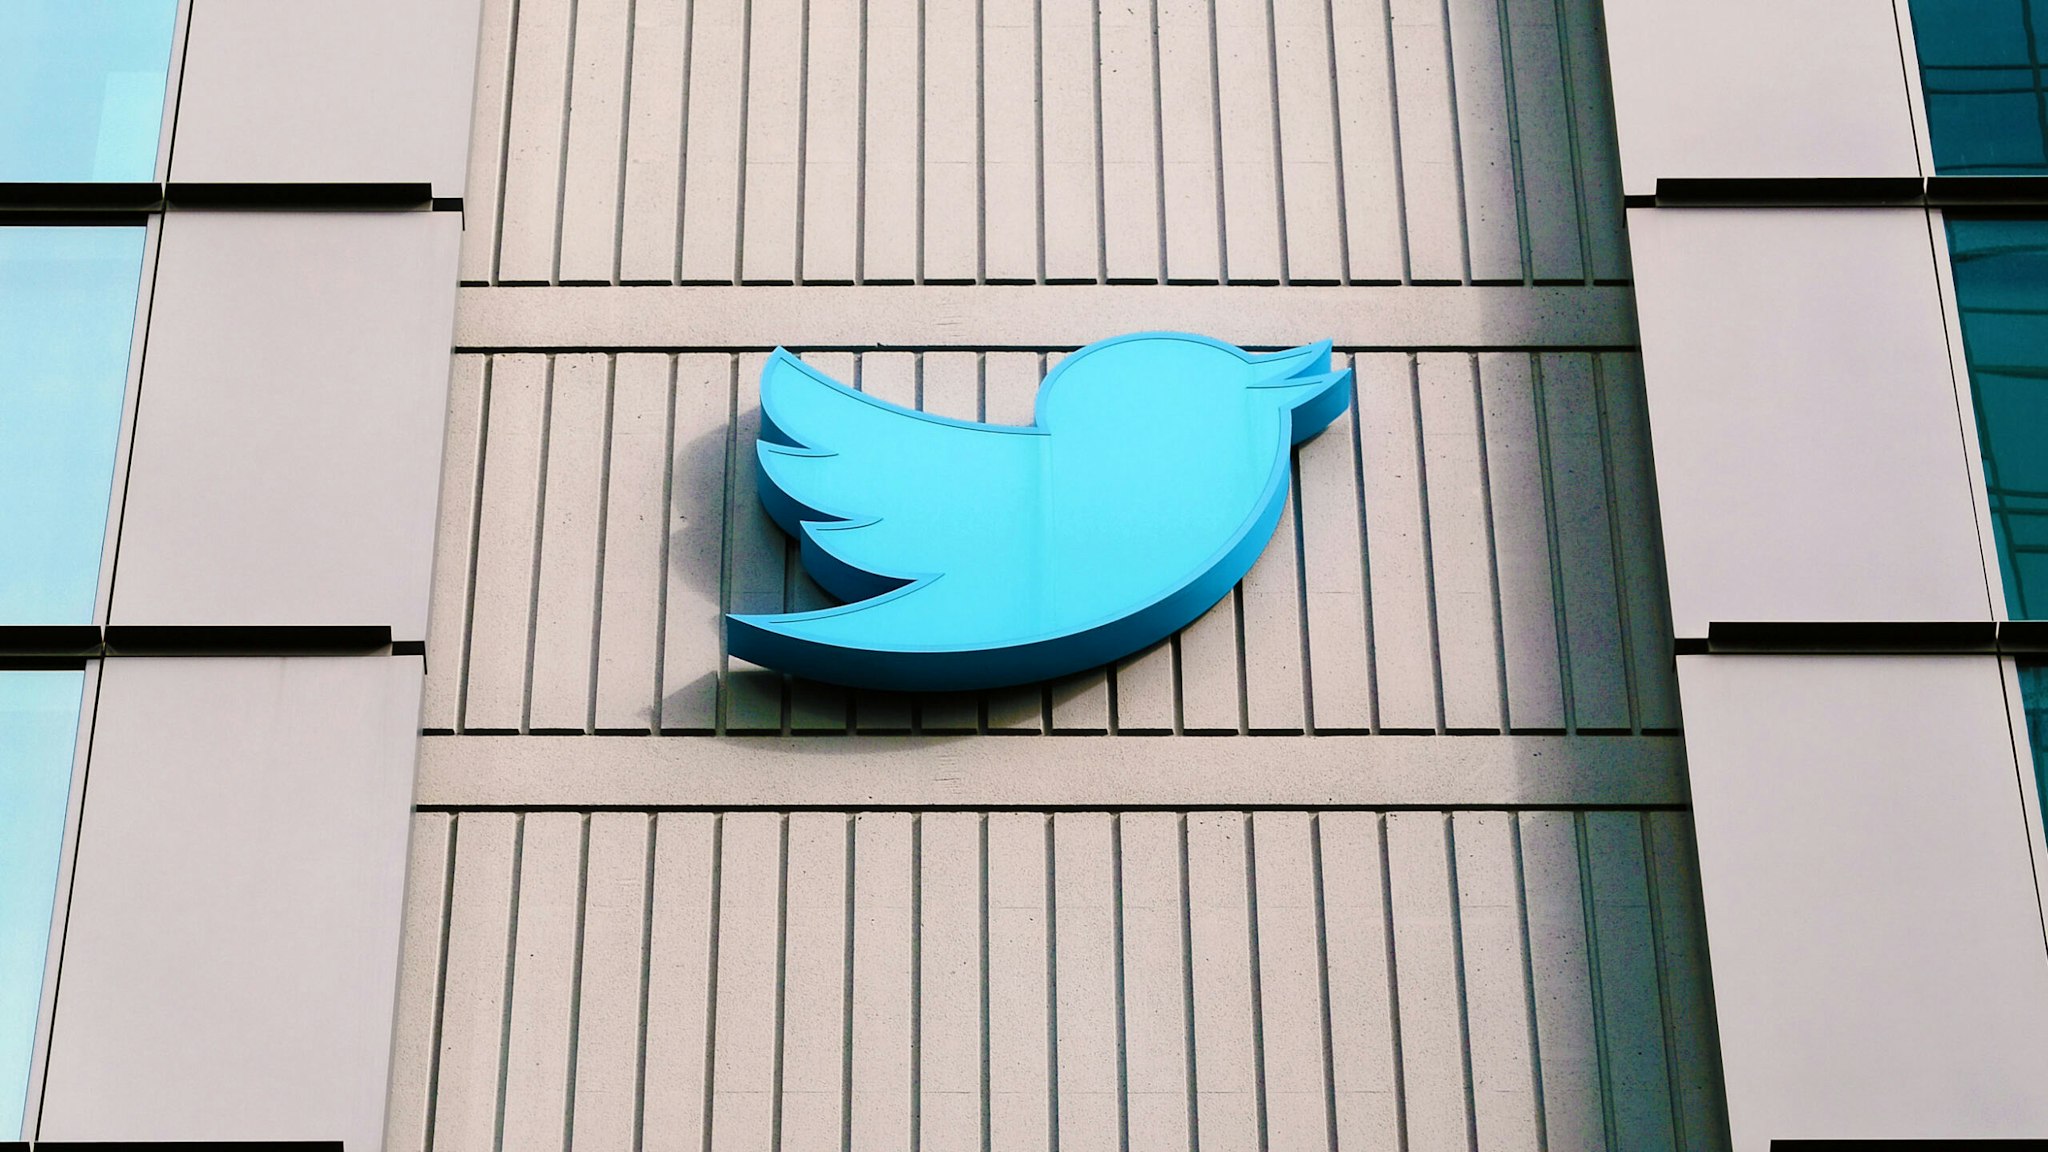 SAN FRANCISCO, CA - NOVEMBER 04: Twitter headquarters stands on 10th Street on November 4, 2022 in San Francisco, California. Twitter Inc reportedly began laying off employees across its departments on Friday as new owner Elon Musk is reportedly looking to cut around half of the company's workforce.